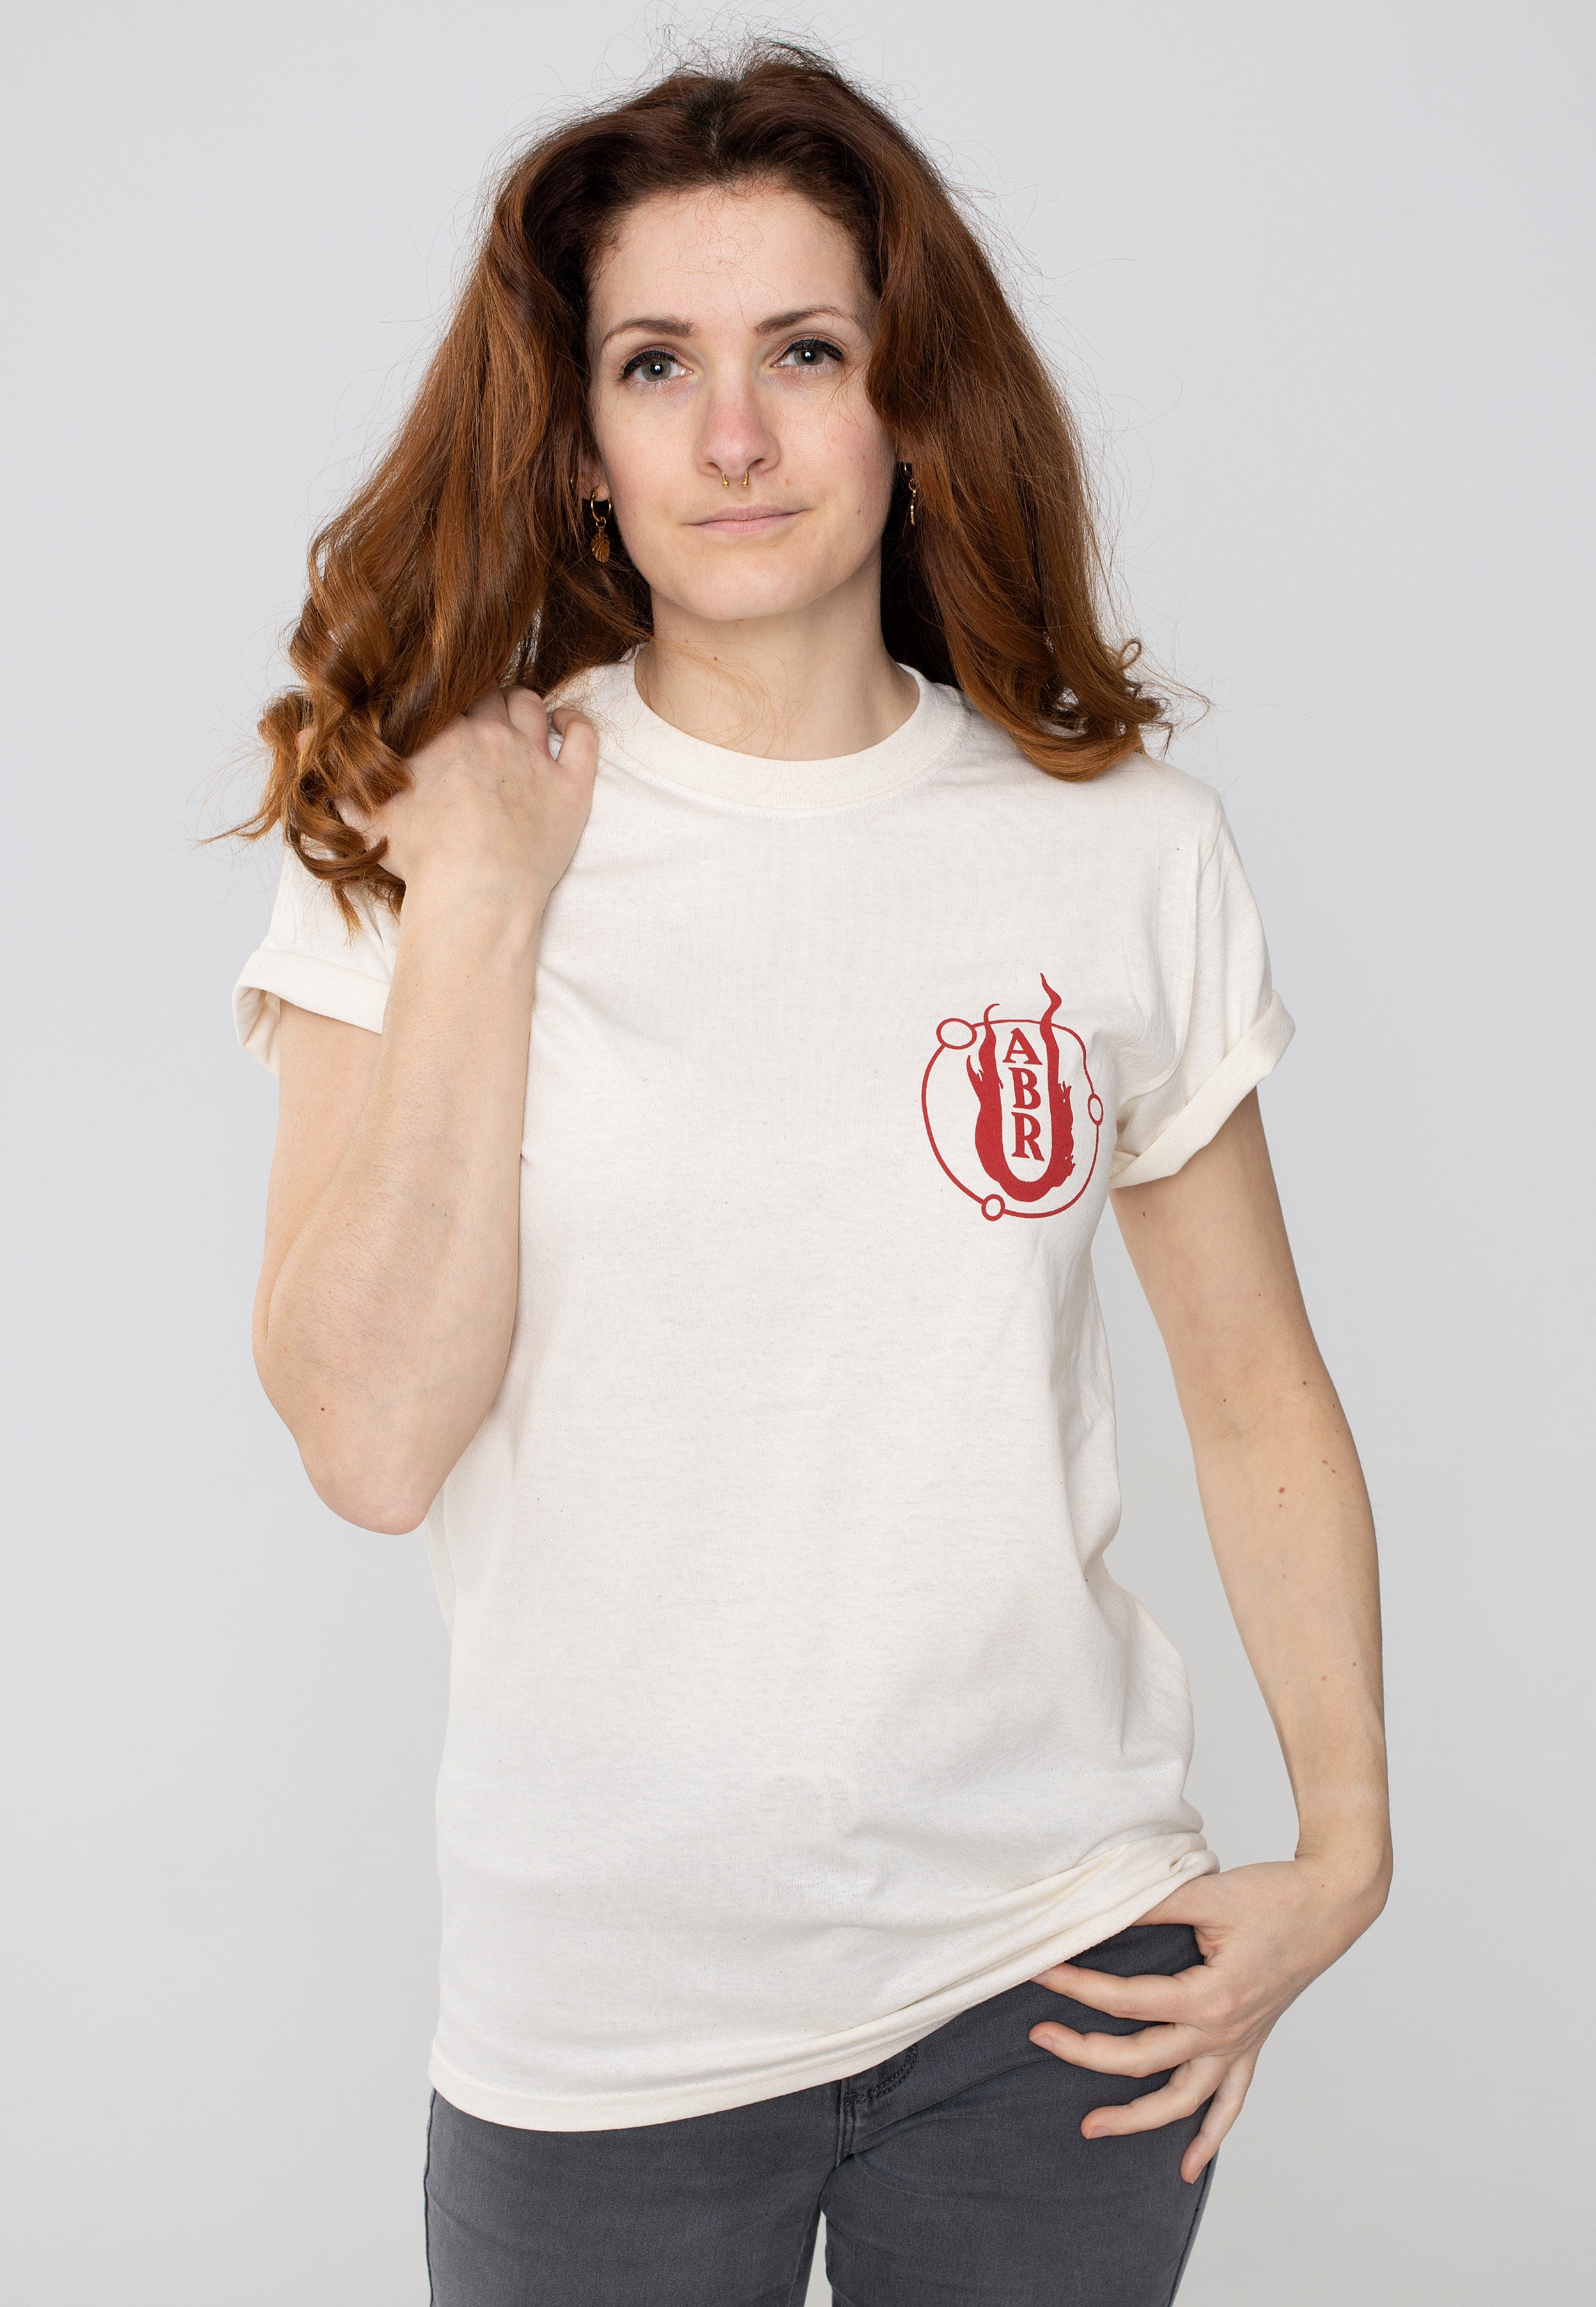 August Burns Red - Take A Chance Natural - T-Shirt | Women-Image